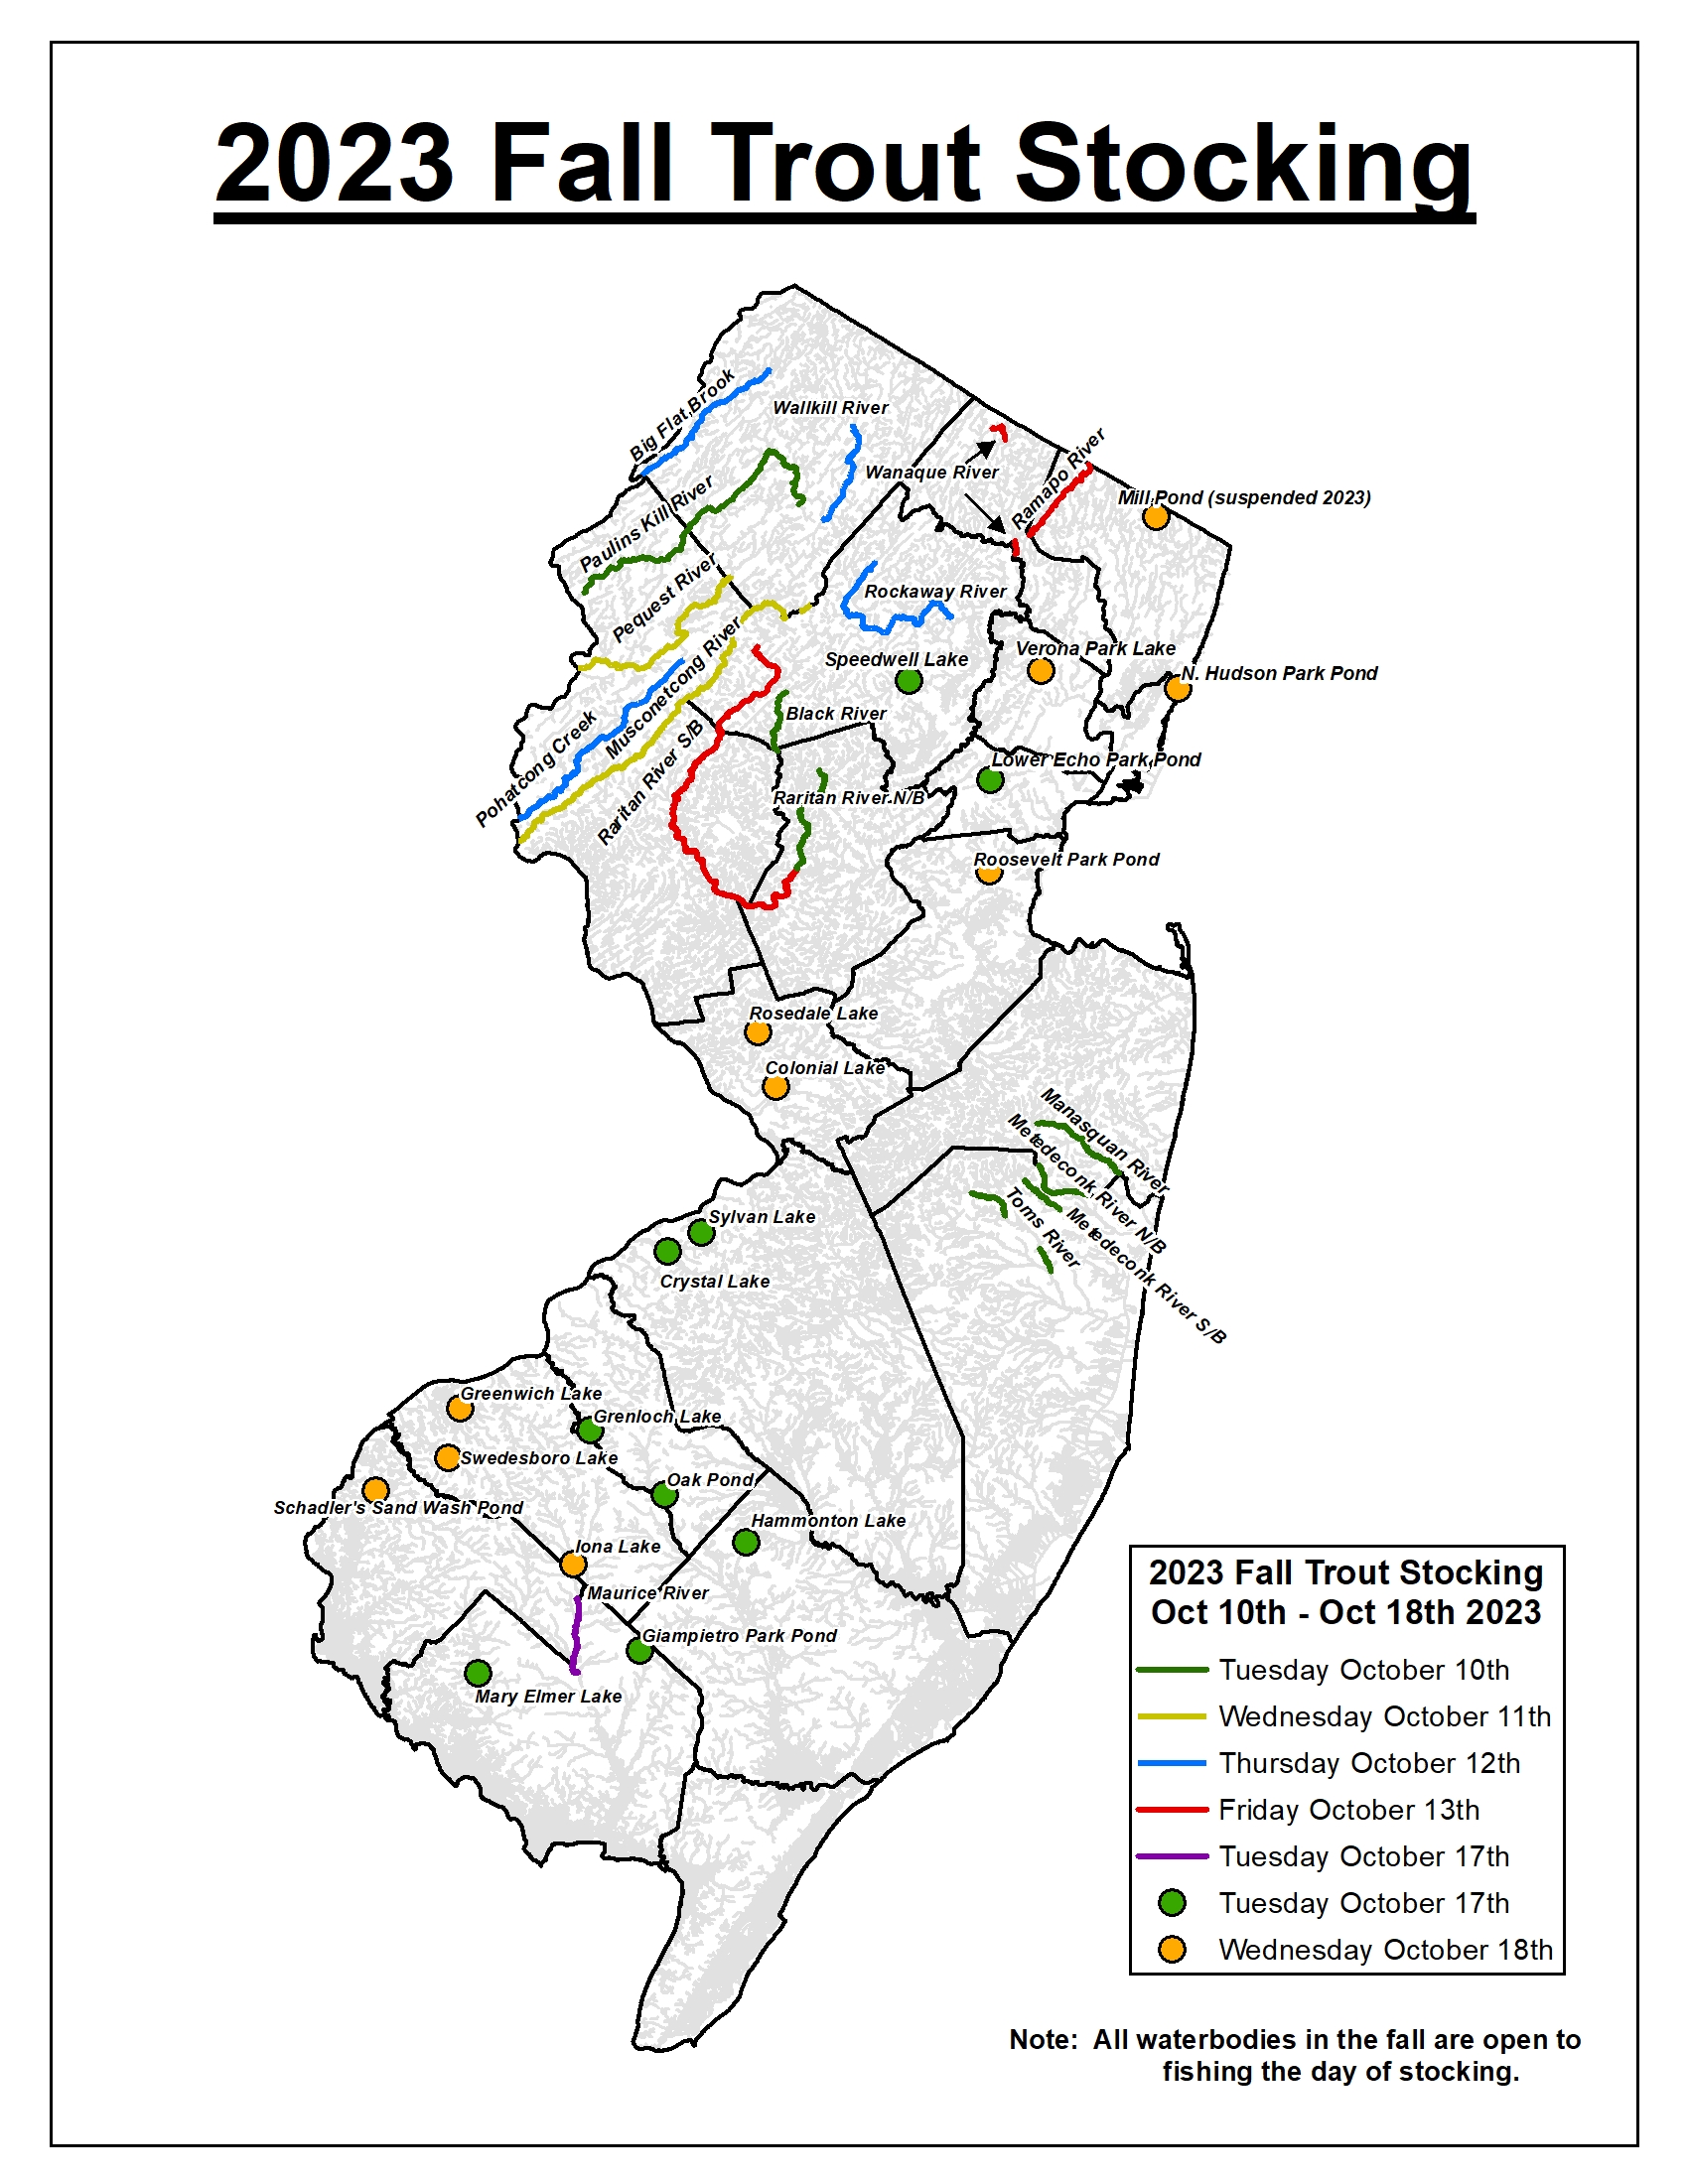 NJDEP Fish & Wildlife 2023 Fall Trout Stocking Schedule